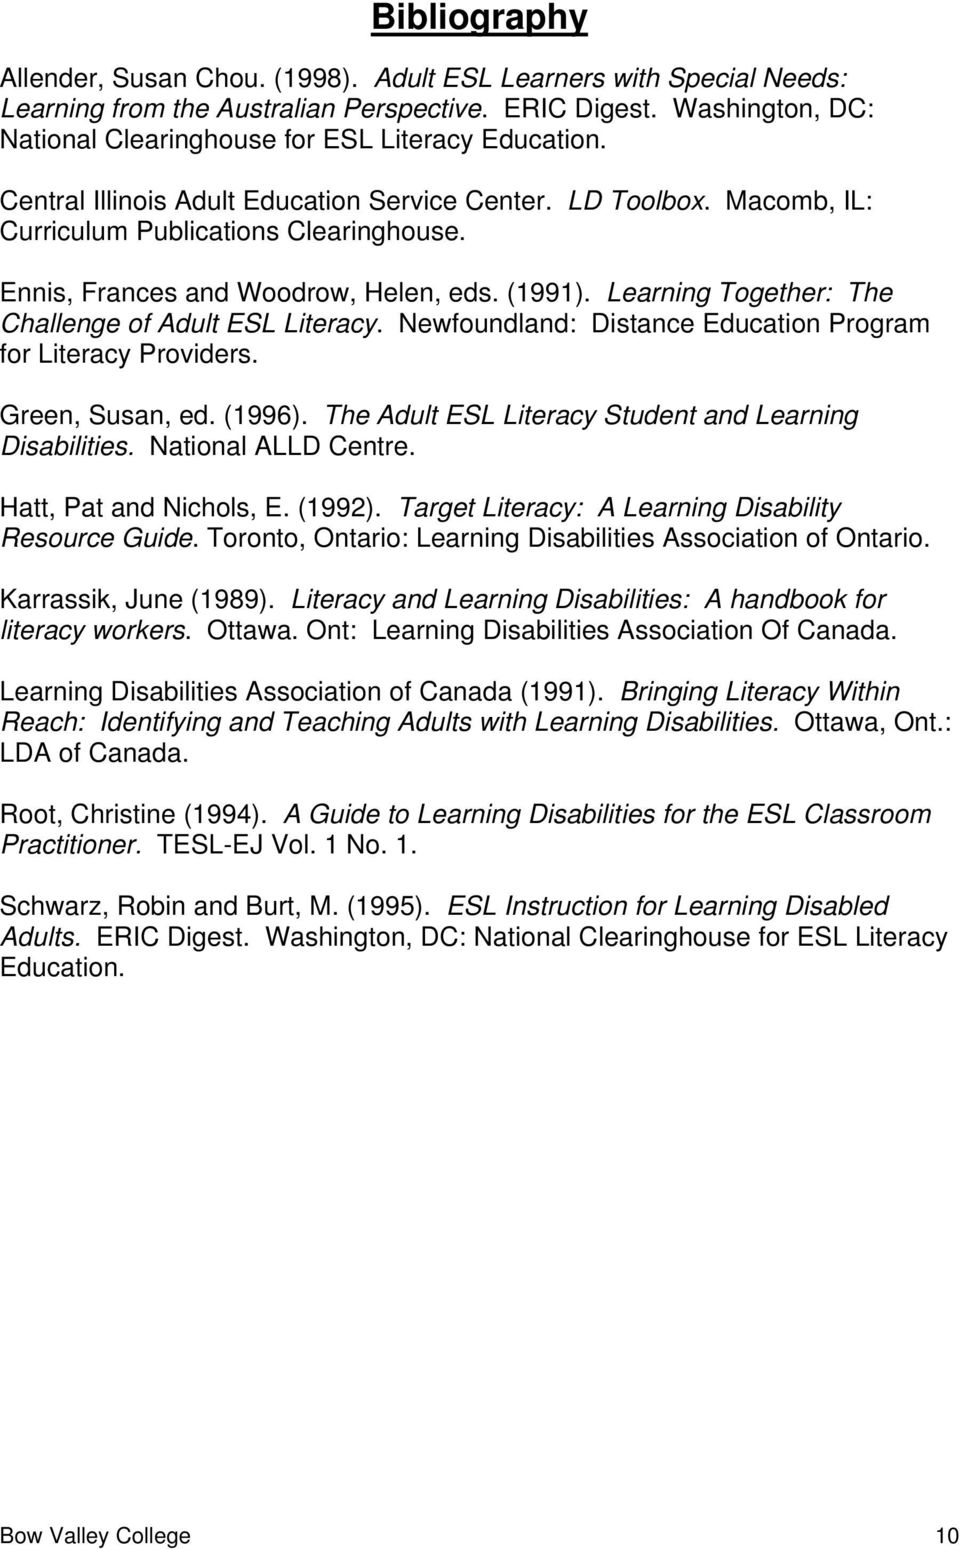 Ennis, Frances and Woodrow, Helen, eds. (1991). Learning Together: The Challenge of Adult ESL Literacy. Newfoundland: Distance Education Program for Literacy Providers. Green, Susan, ed. (1996).